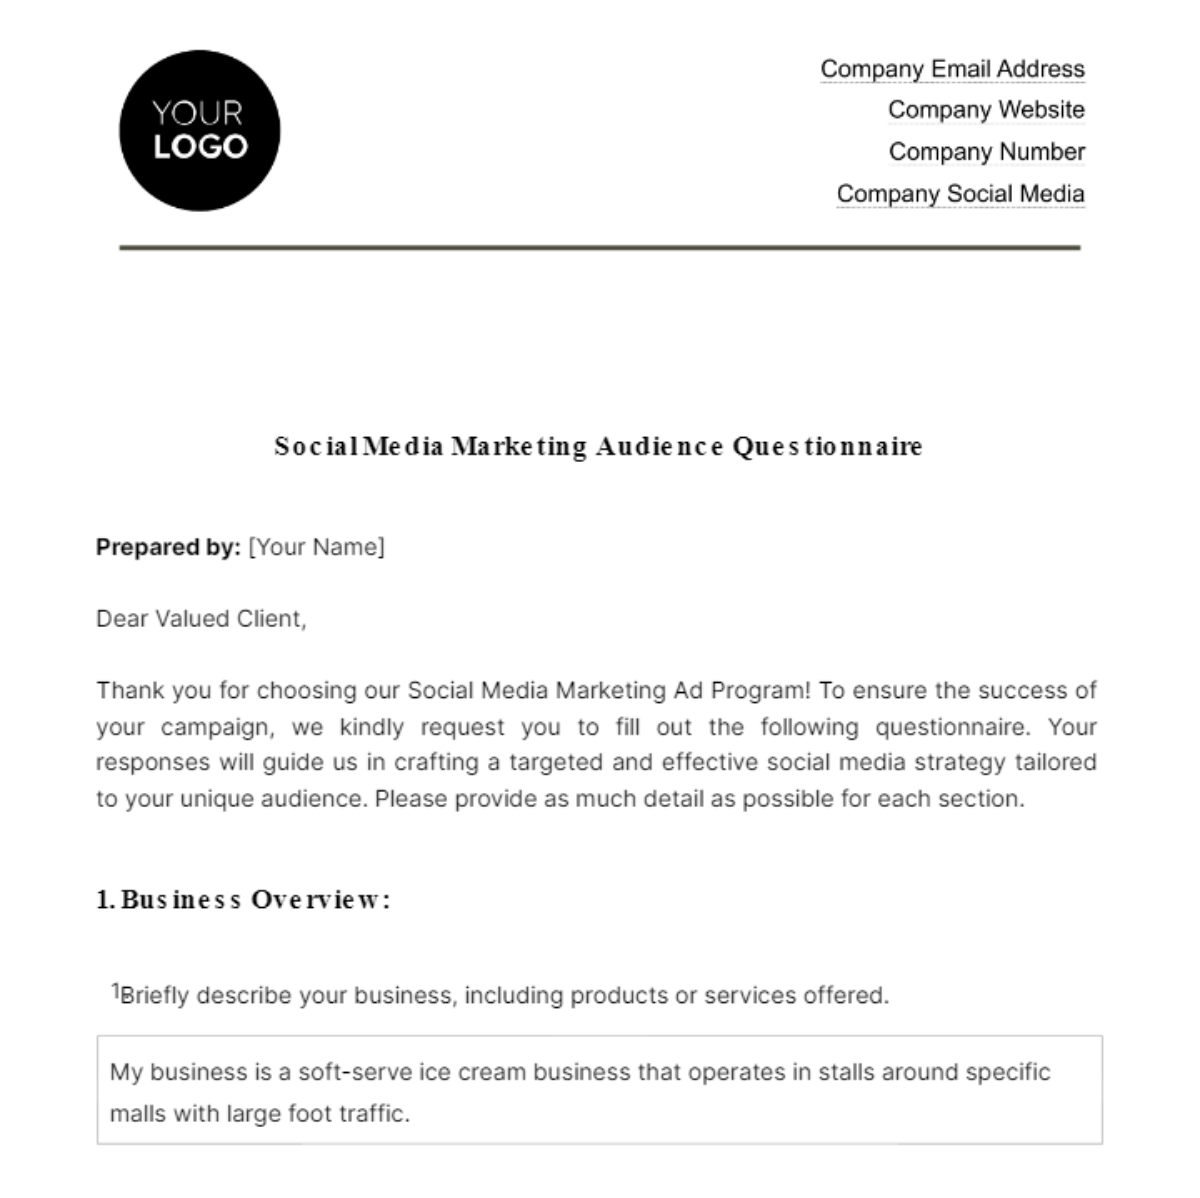 Social Media Marketing Audience Questionnaire Template